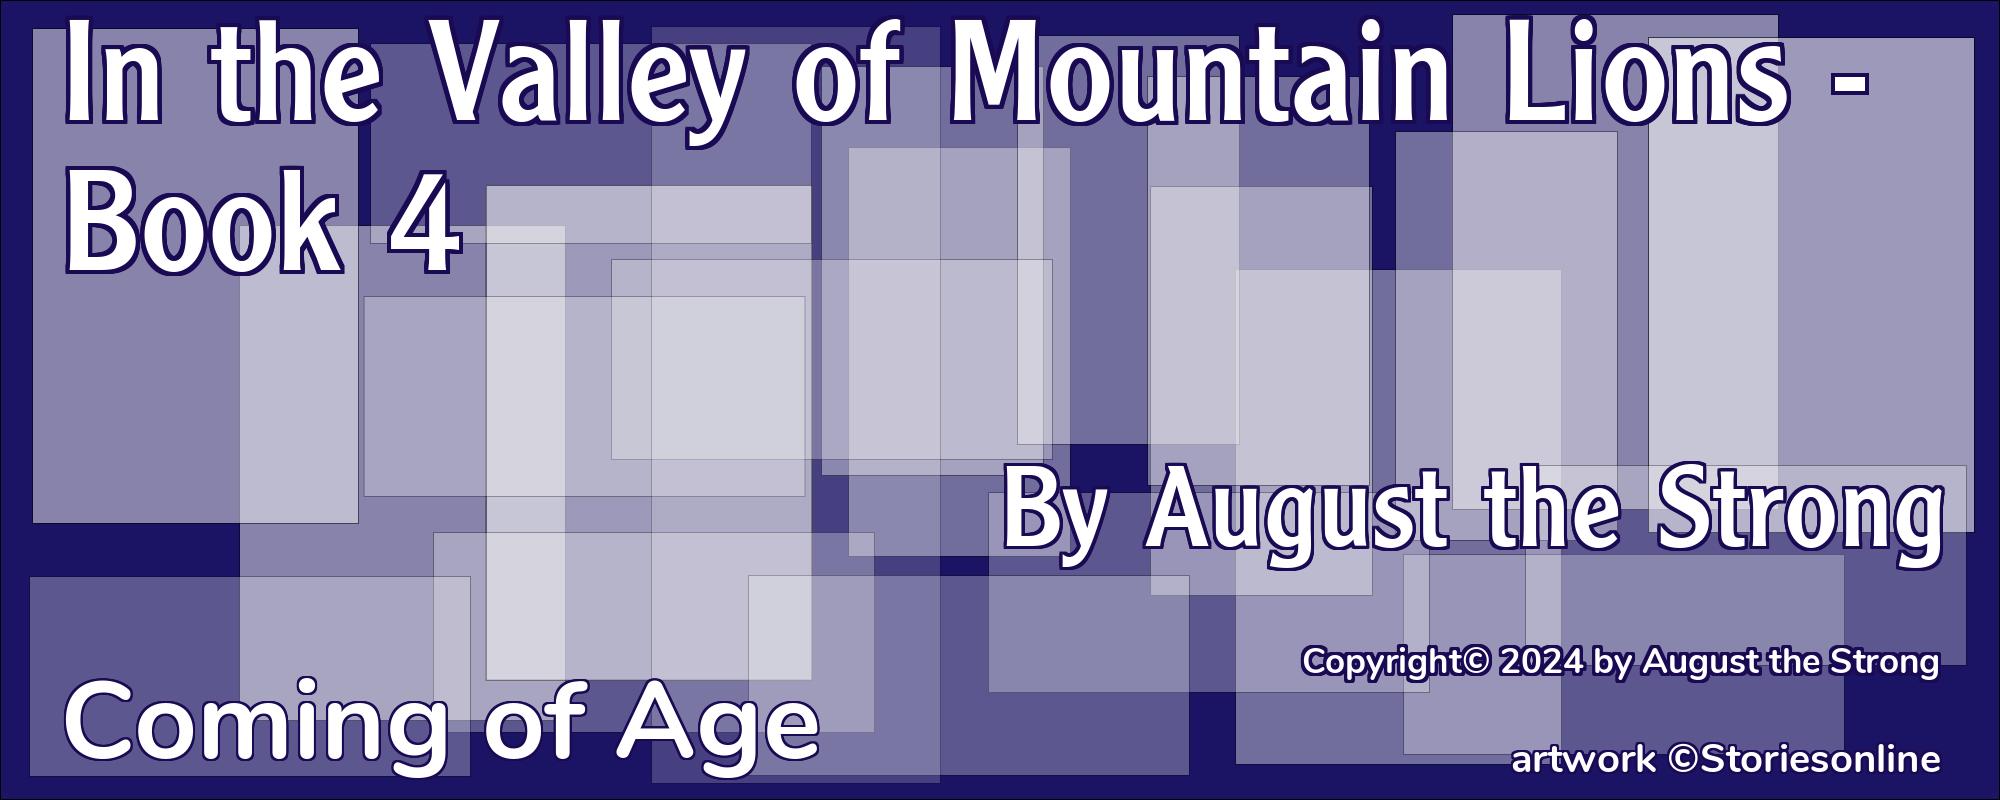 In the Valley of Mountain Lions - Book 4 - Cover